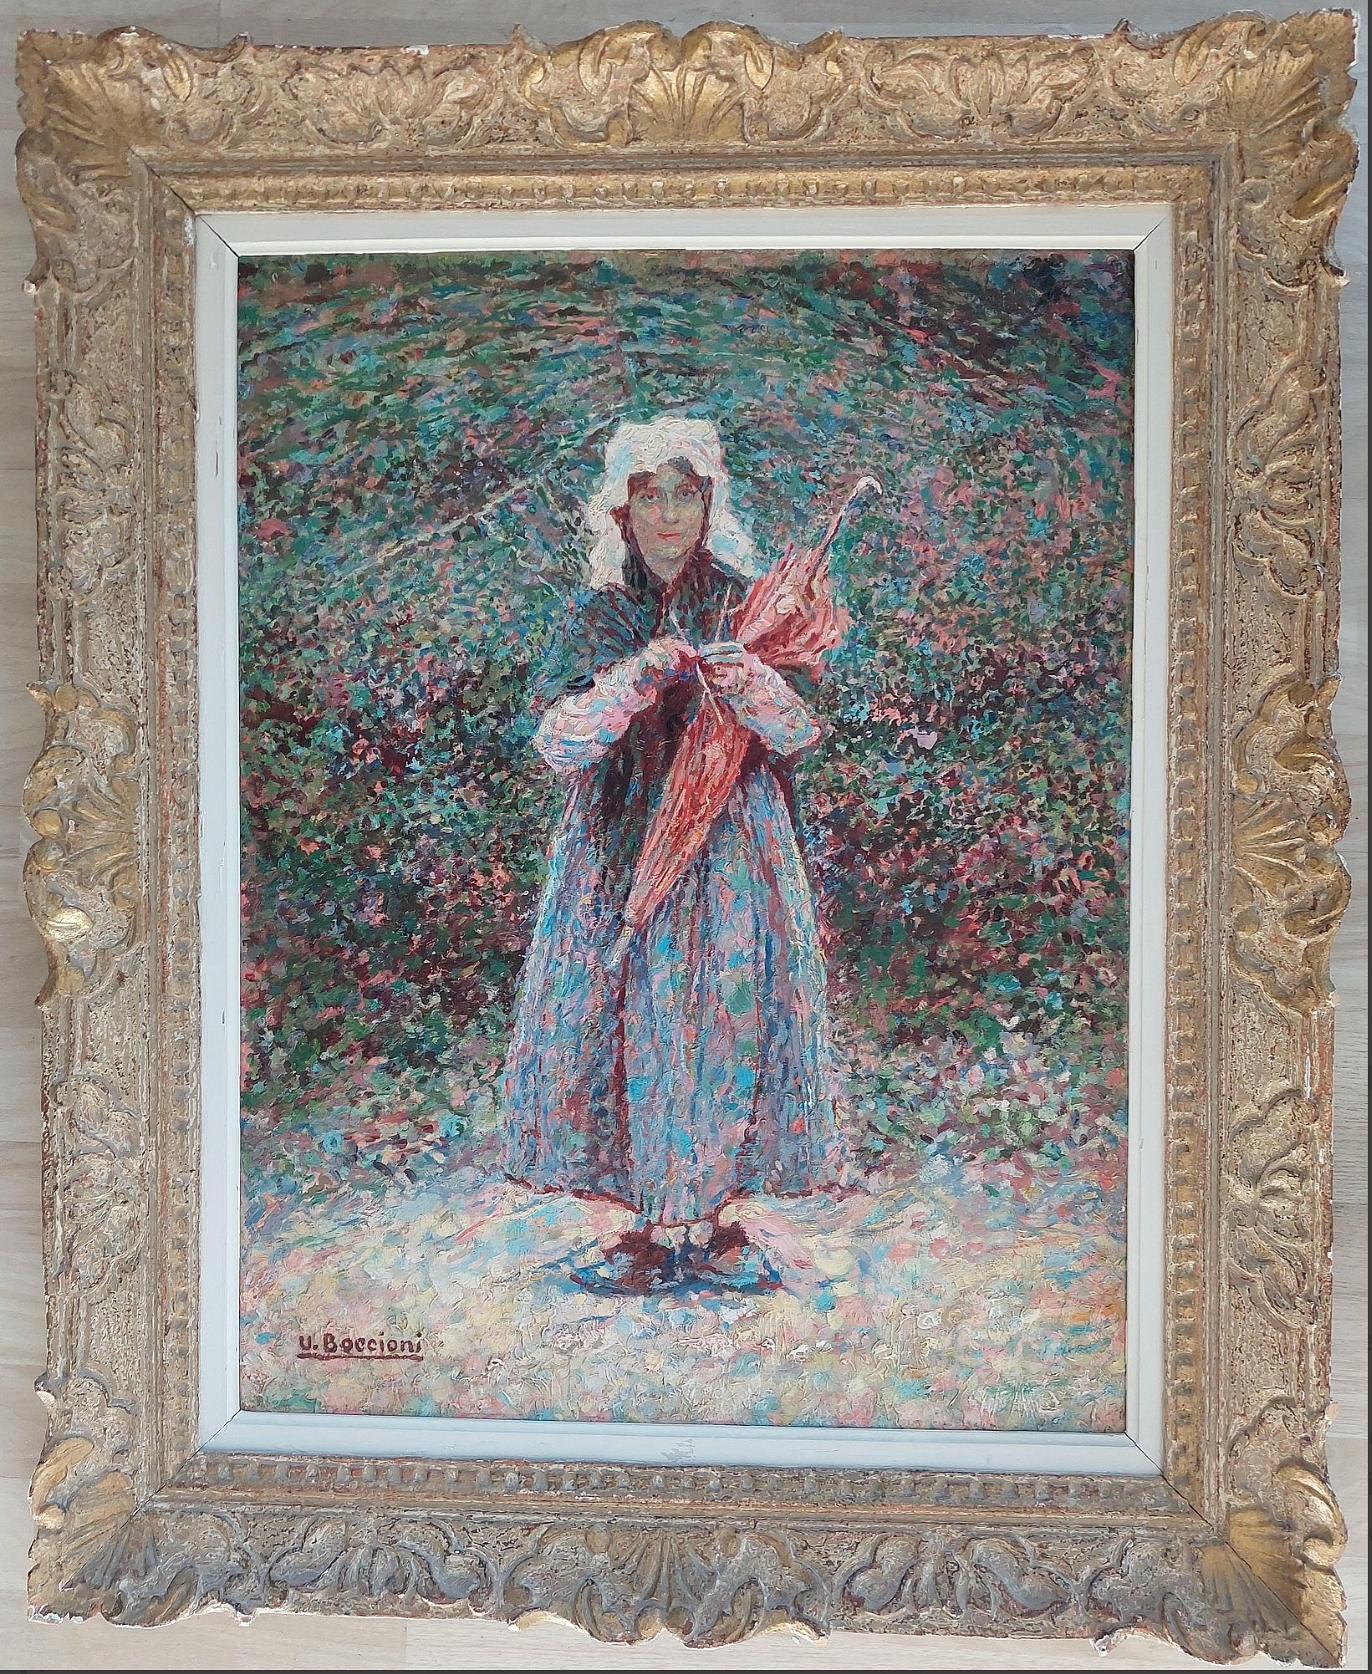 PORTRAIT OF A GIRL OIL PAINTING by Umberto Boccioni, early 20th century